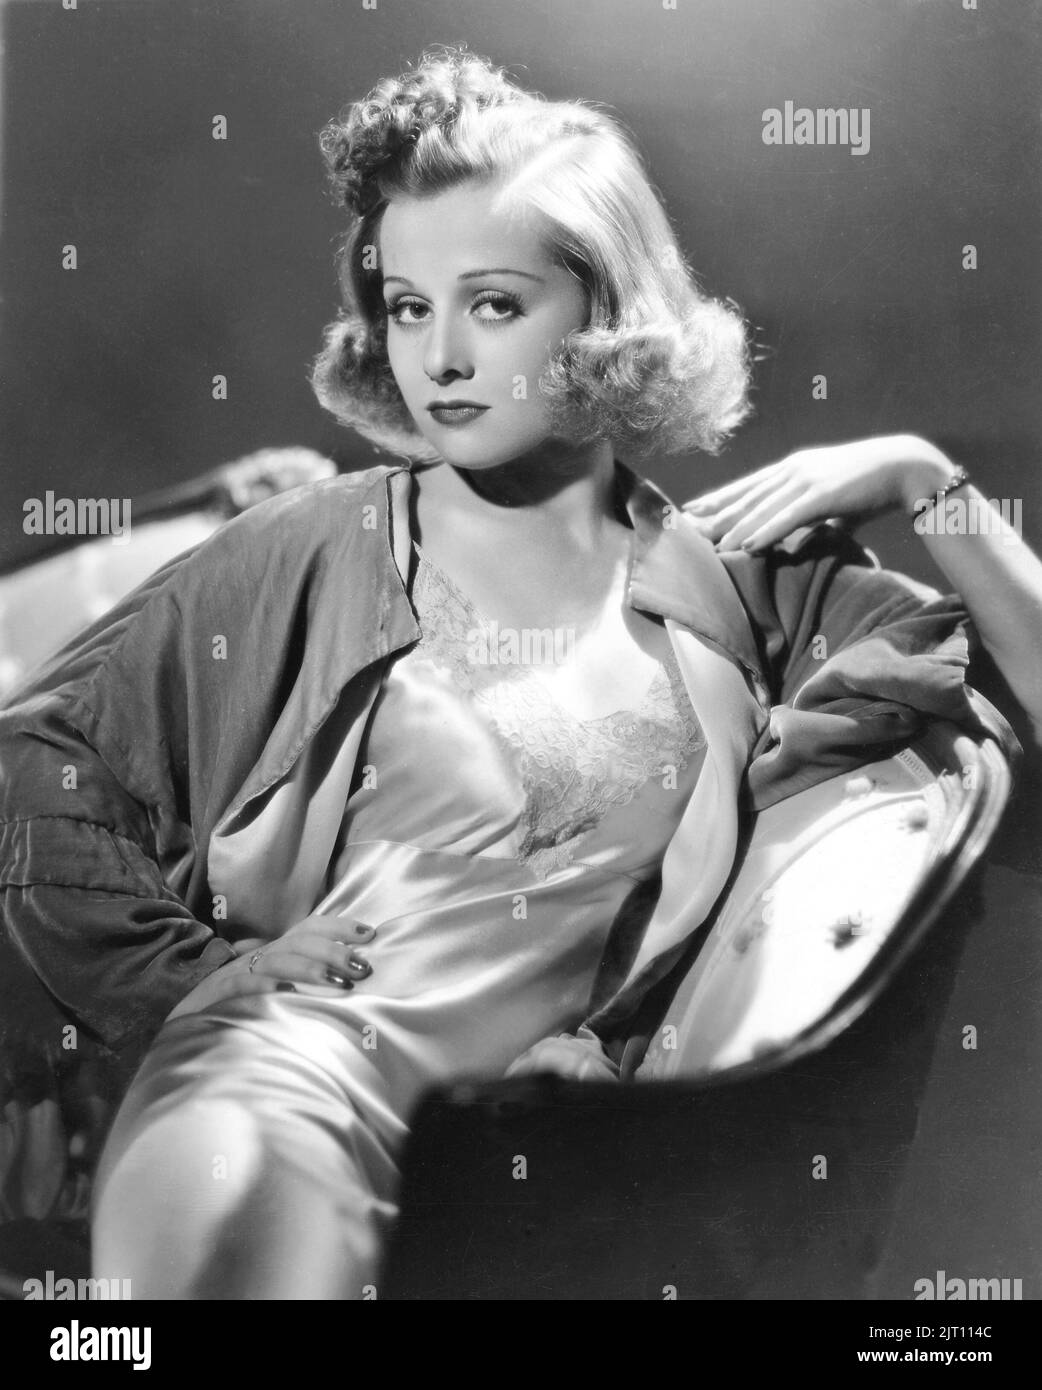 Eleanore whitney Black and White Stock Photos & Images - Alamy